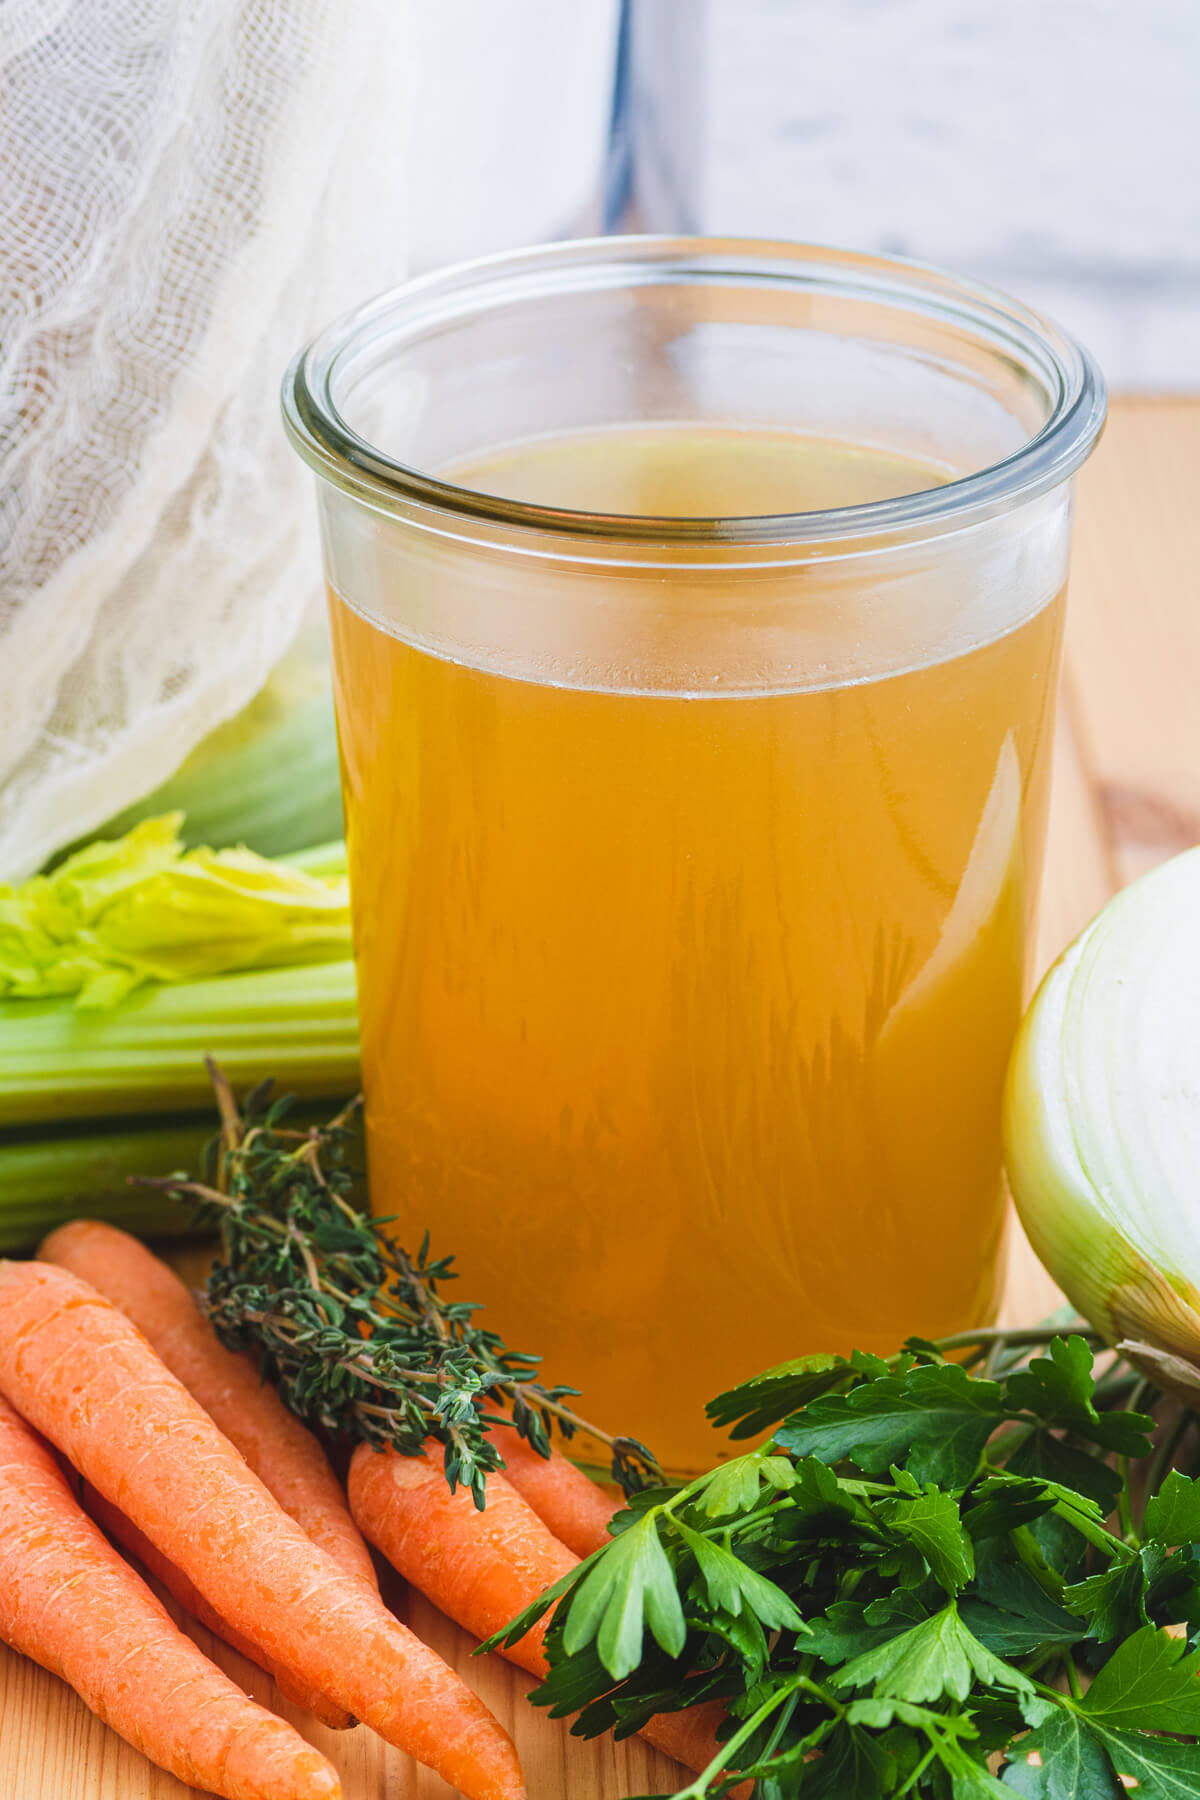 A glass quart jar filled with rich yellow turkey stock beside fresh vegetables and a large stock pot.